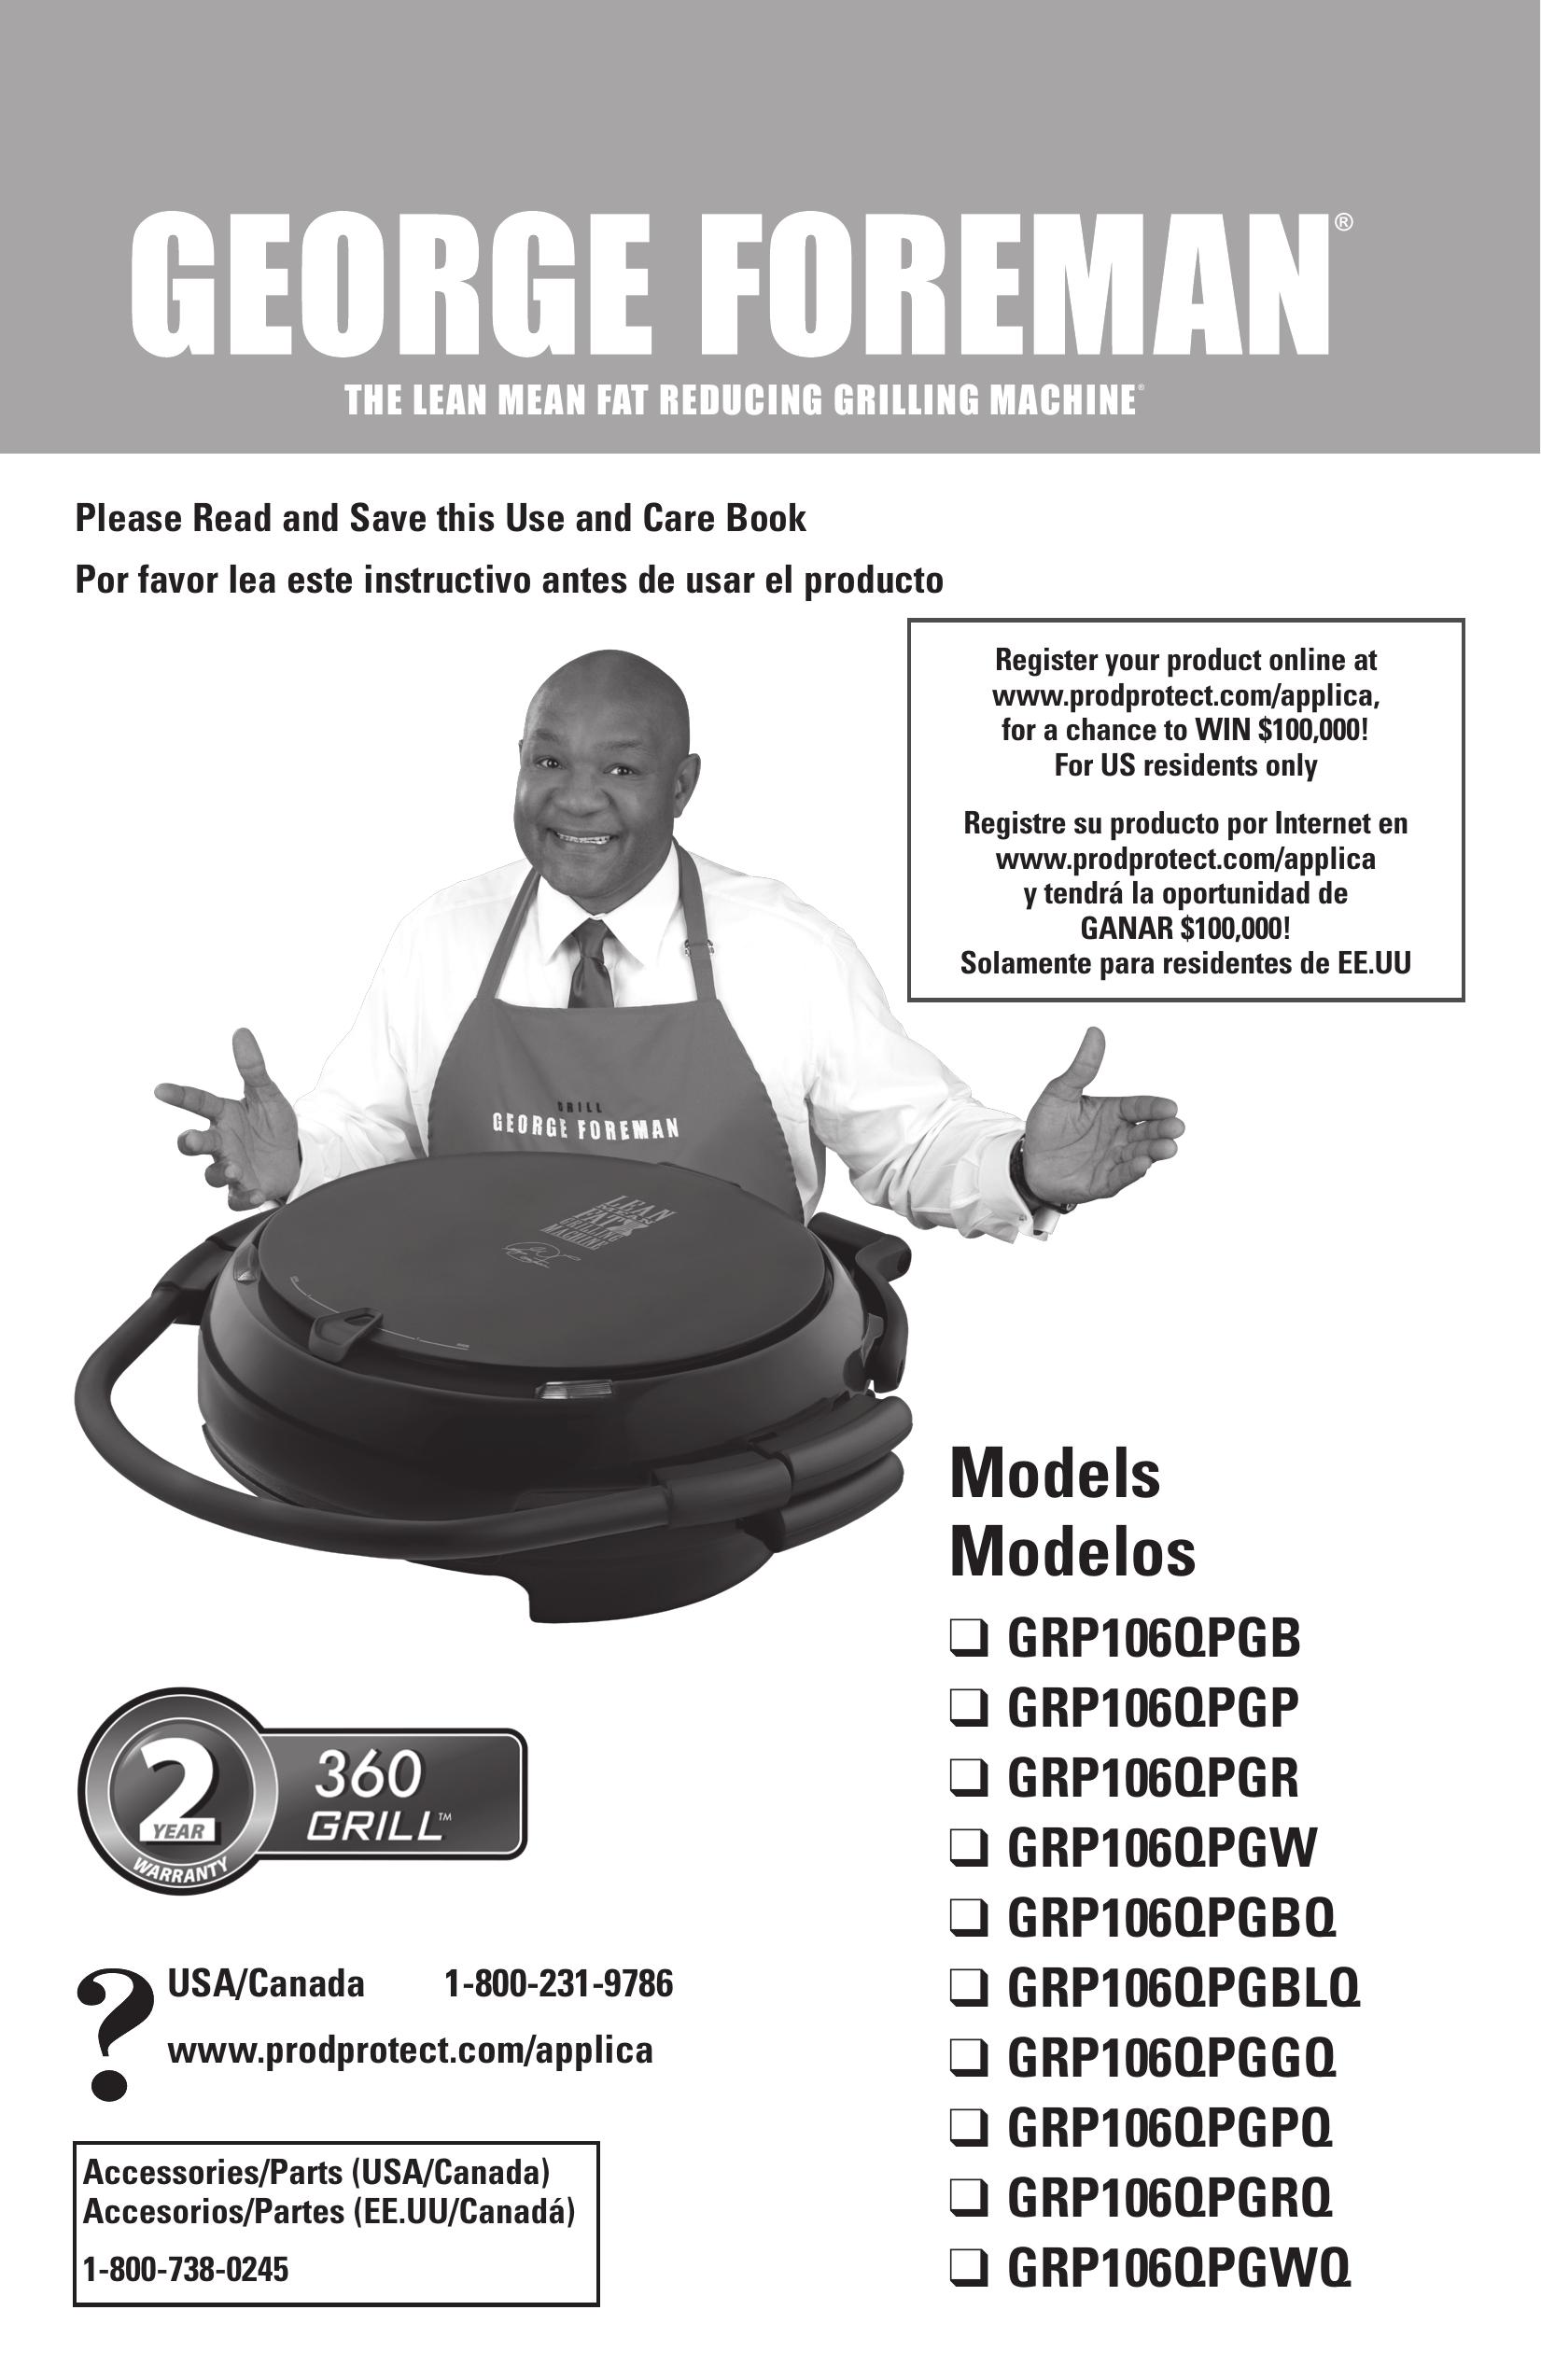 George Foreman GRP106QPGPQ Electric Grill User Manual